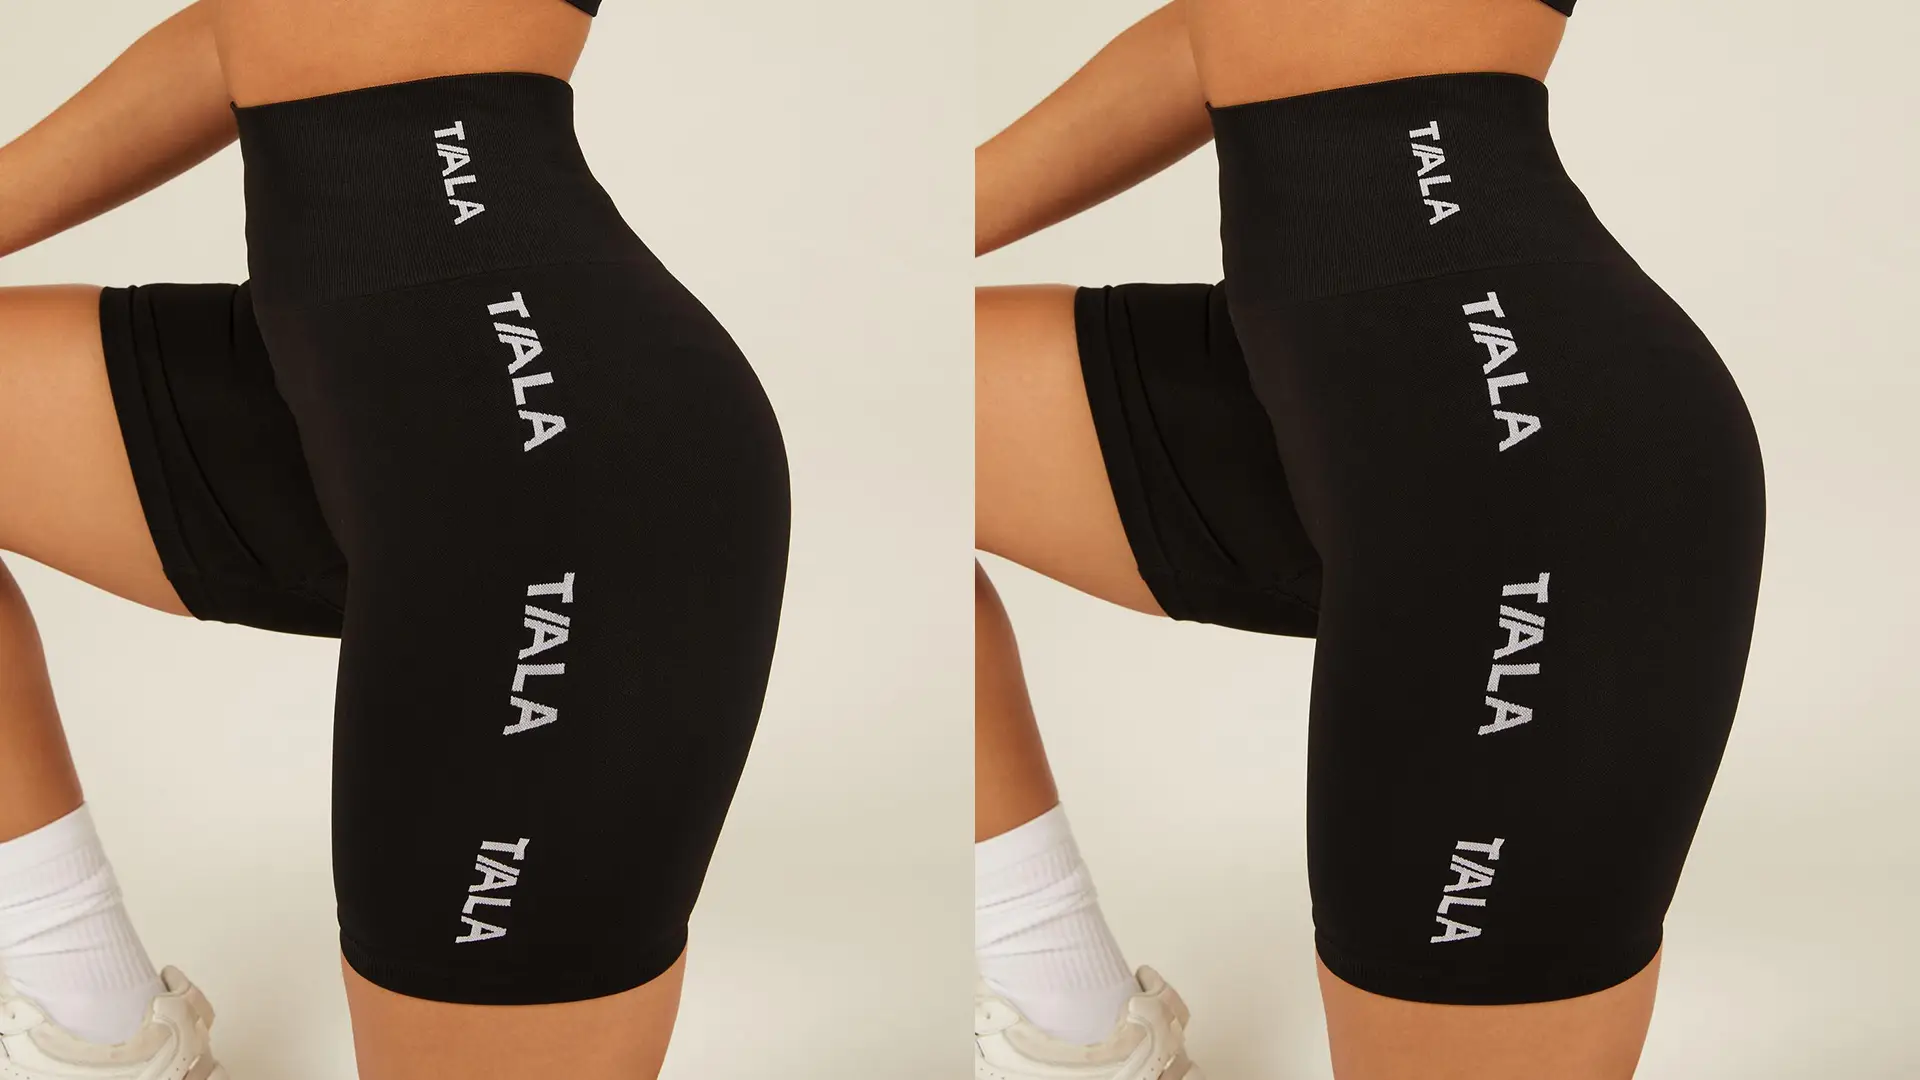 Nike Workout Clothes You Can’t Work Without